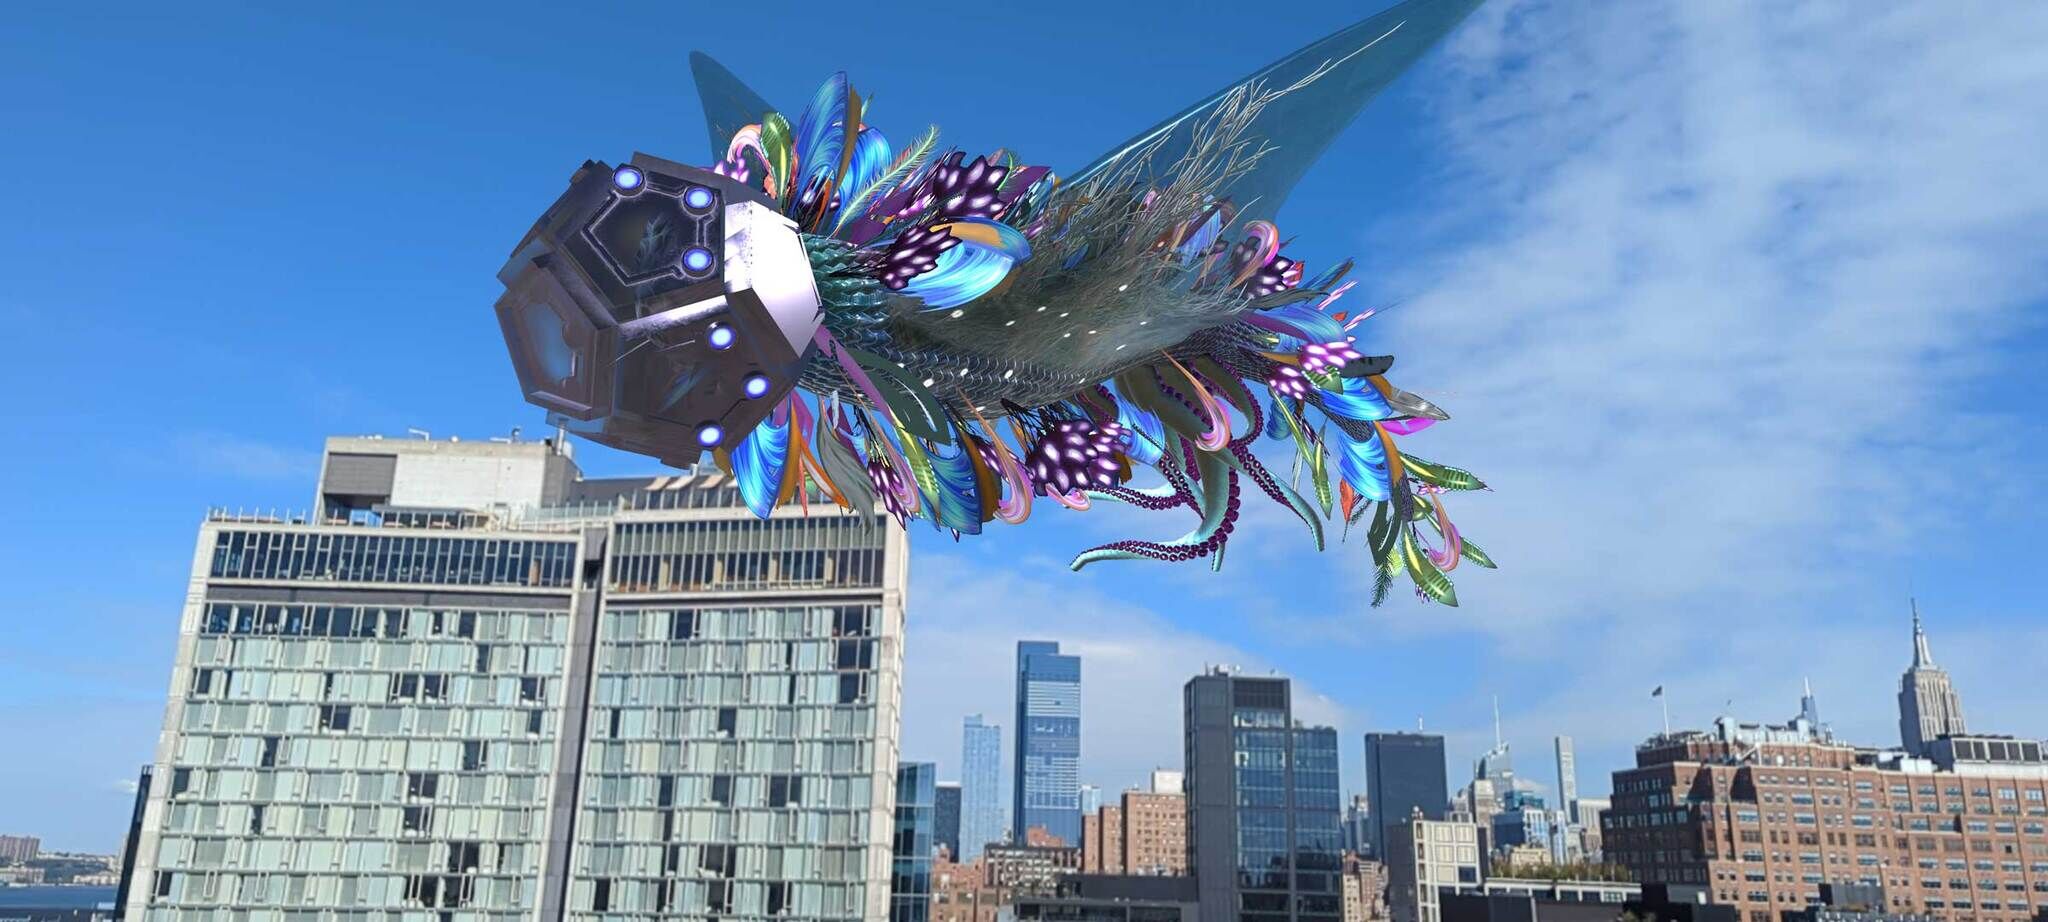 A large creature floats in a sunny sky with many feathers fluttering around its body.